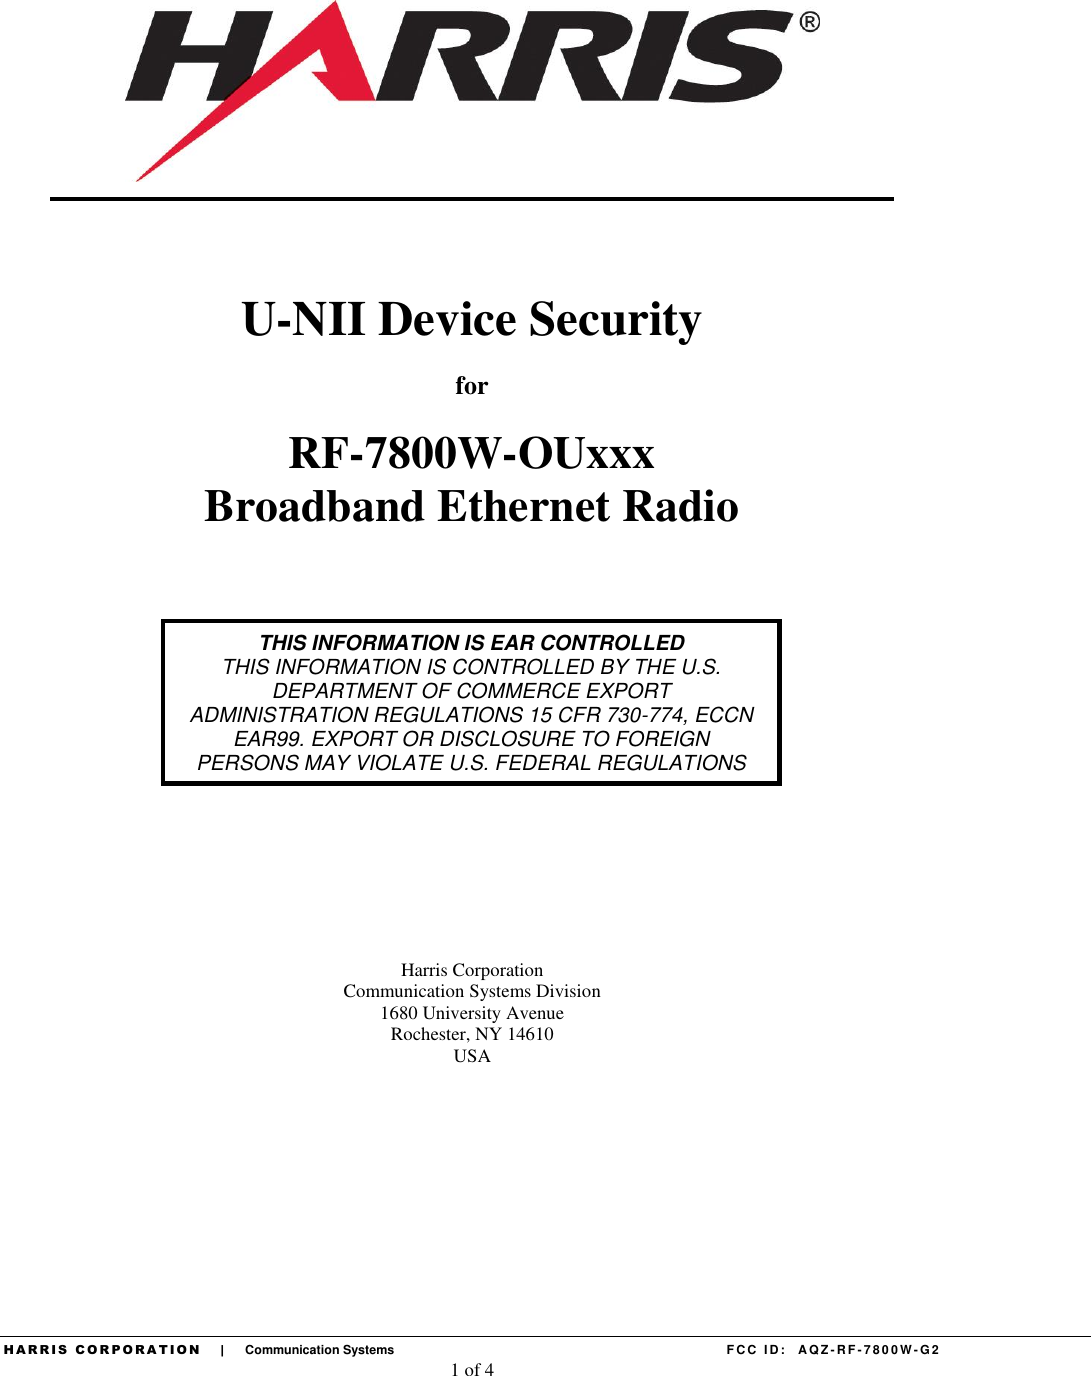  H A R R I S   C O R P O R A T I O N       |       Communication Systems    F CC  ID:   AQZ - RF- 7 8 0 0 W - G2 1 of 4             U-NII Device Security for RF-7800W-OUxxx Broadband Ethernet Radio              Harris Corporation Communication Systems Division 1680 University Avenue Rochester, NY 14610 USA    THIS INFORMATION IS EAR CONTROLLED THIS INFORMATION IS CONTROLLED BY THE U.S. DEPARTMENT OF COMMERCE EXPORT ADMINISTRATION REGULATIONS 15 CFR 730-774, ECCN EAR99. EXPORT OR DISCLOSURE TO FOREIGN PERSONS MAY VIOLATE U.S. FEDERAL REGULATIONS 